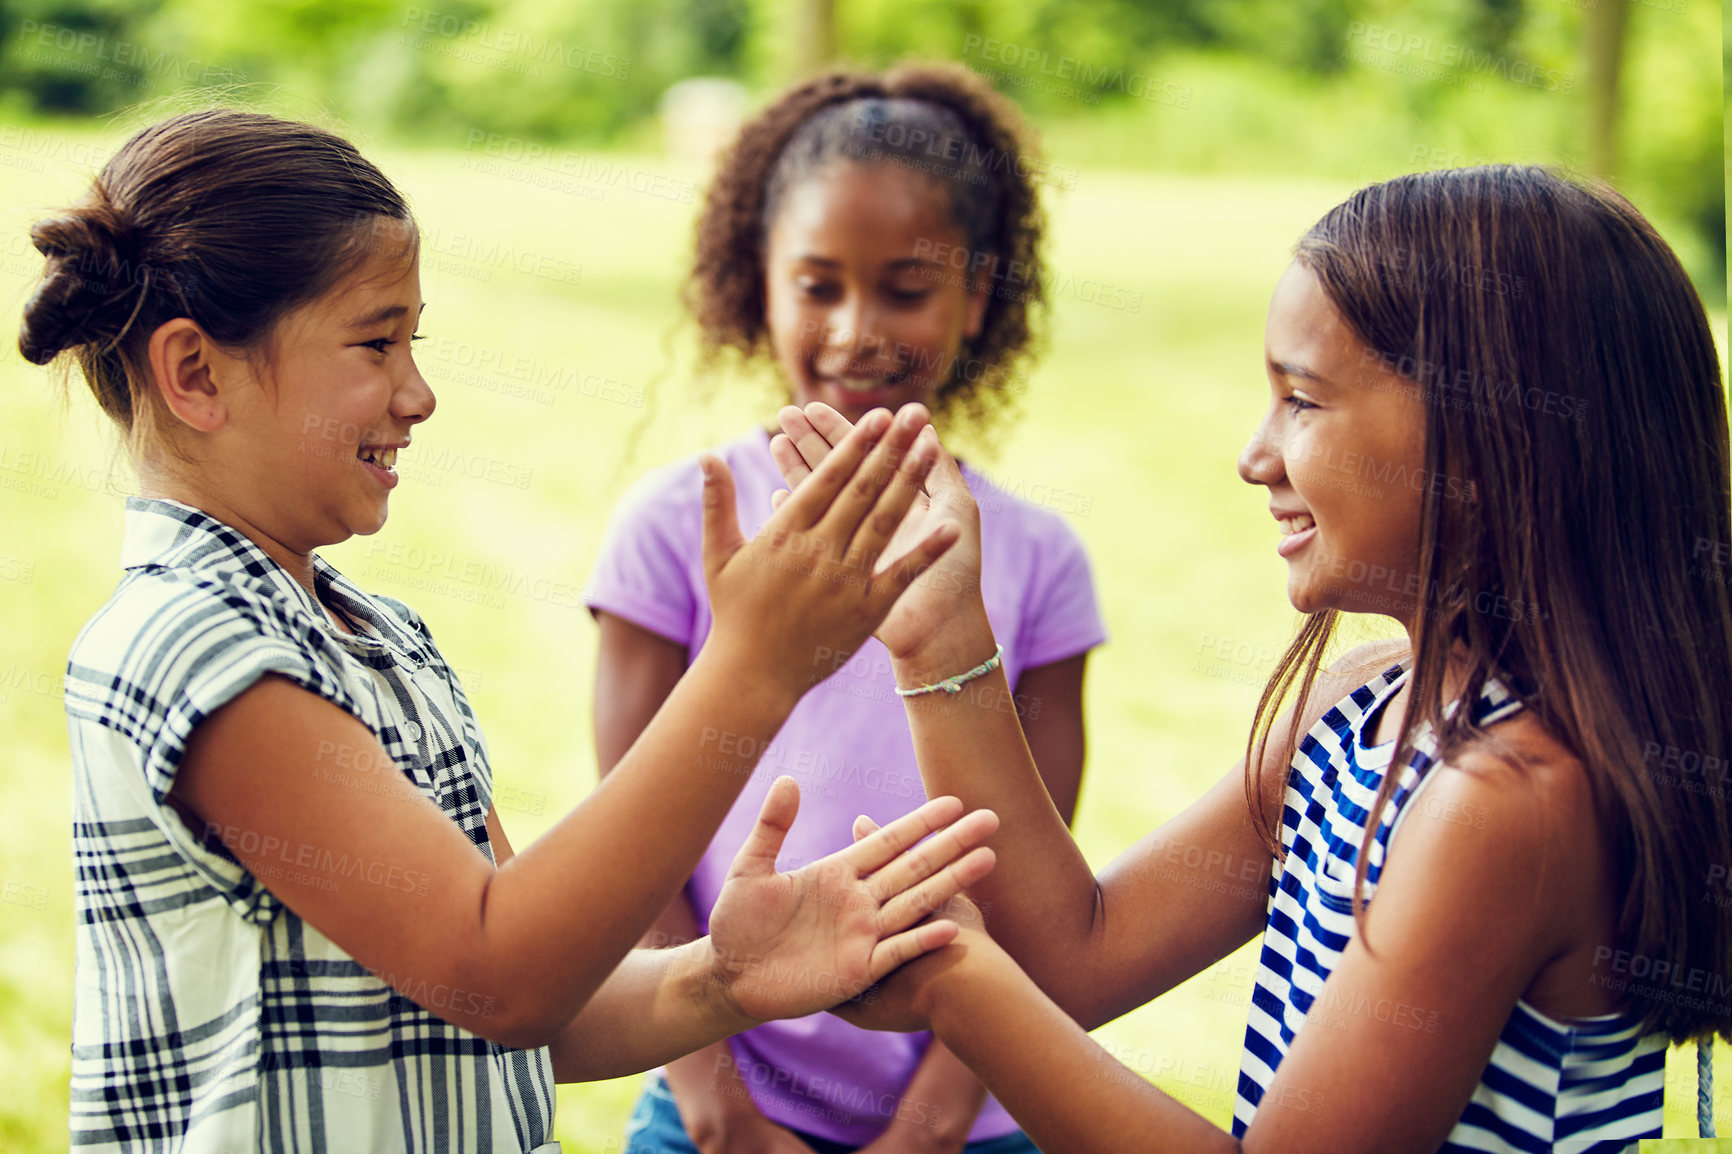 Buy stock photo Shot of adorable little girls playing hand games outdoors